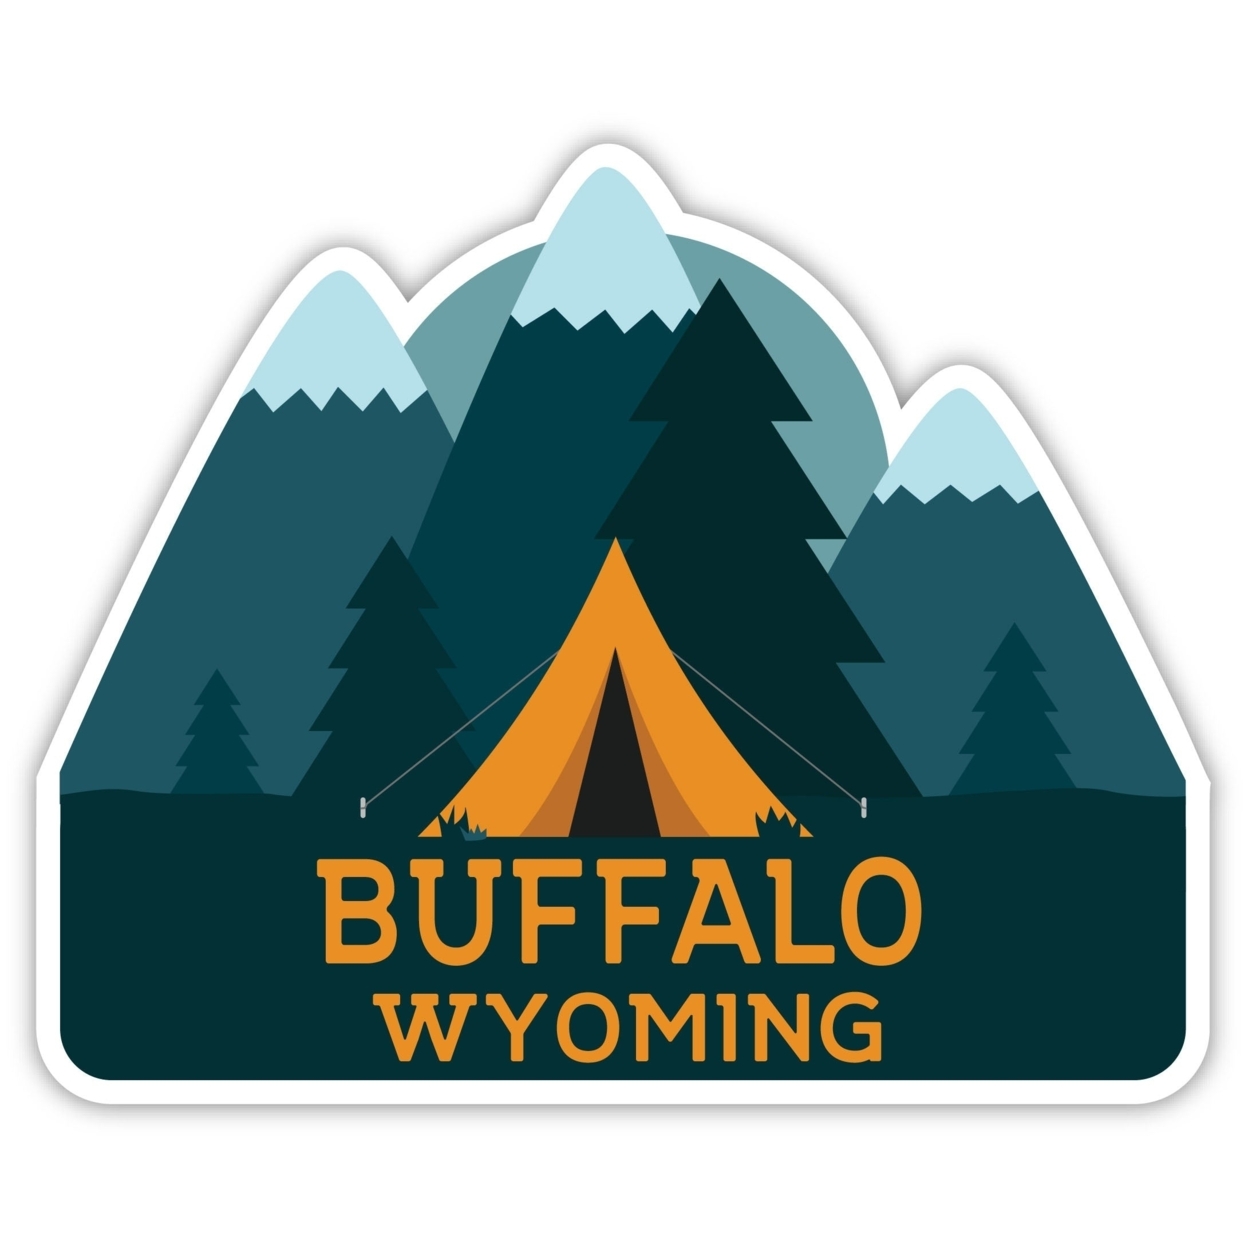 Buffalo Wyoming Souvenir Decorative Stickers (Choose Theme And Size) - 4-Pack, 2-Inch, Adventures Awaits